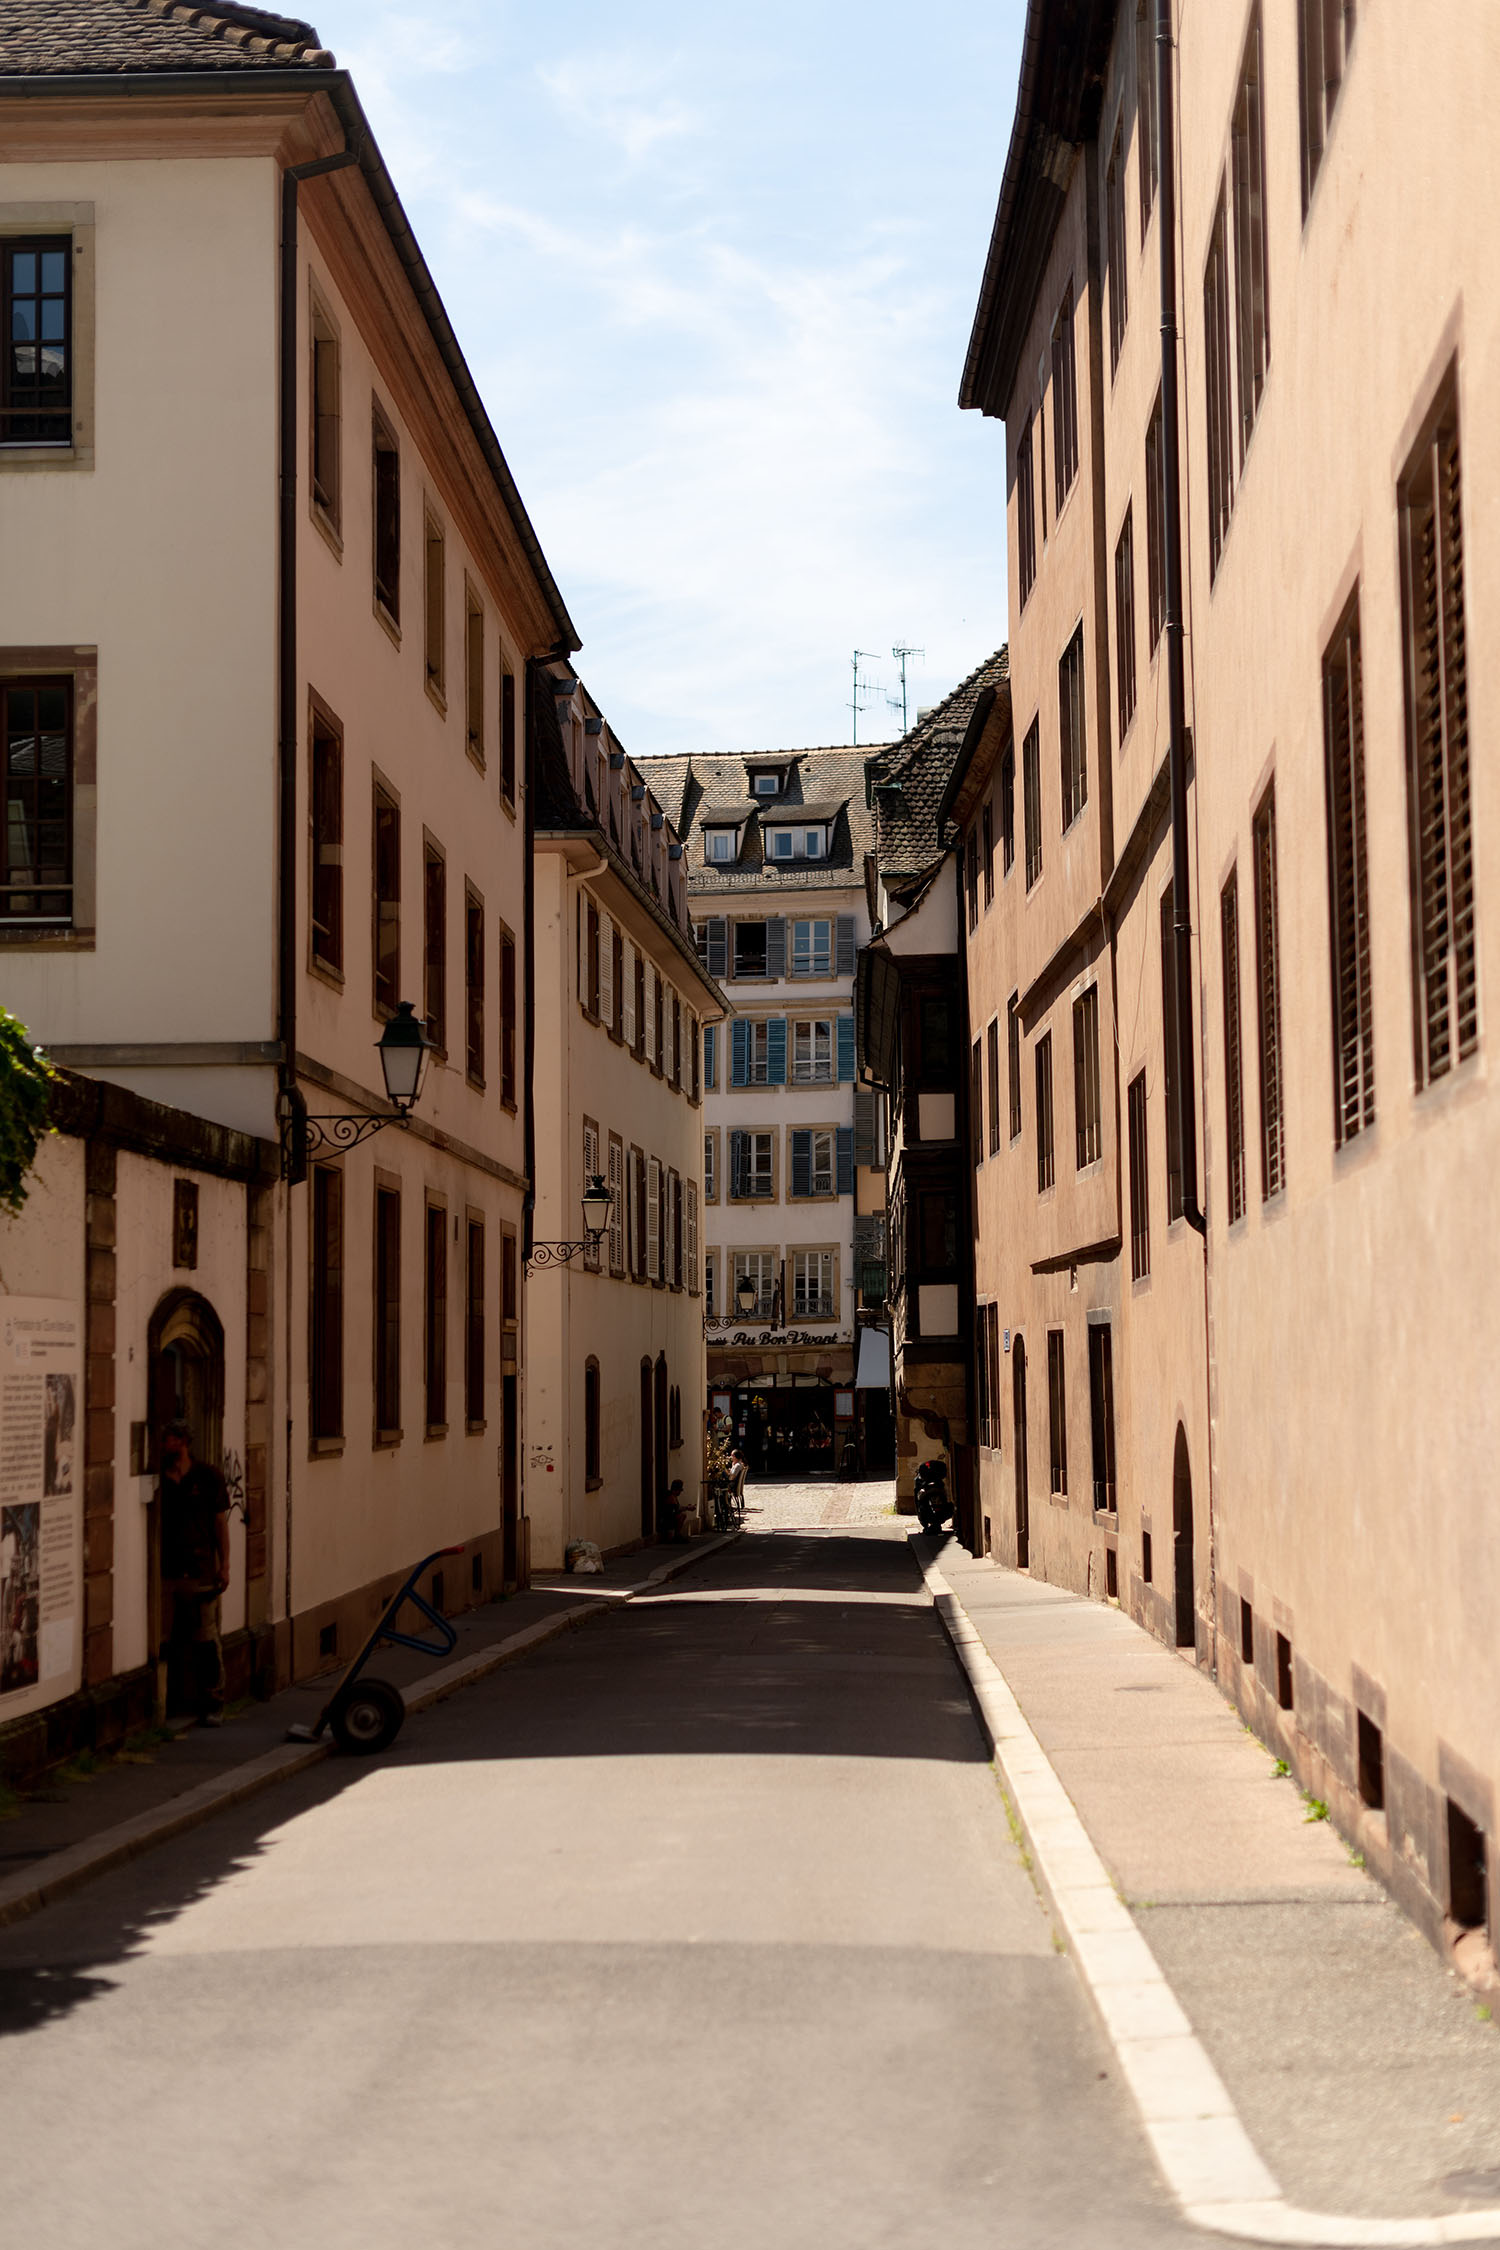 Coco & Voltaire - Sunny street in Strasbourg old town